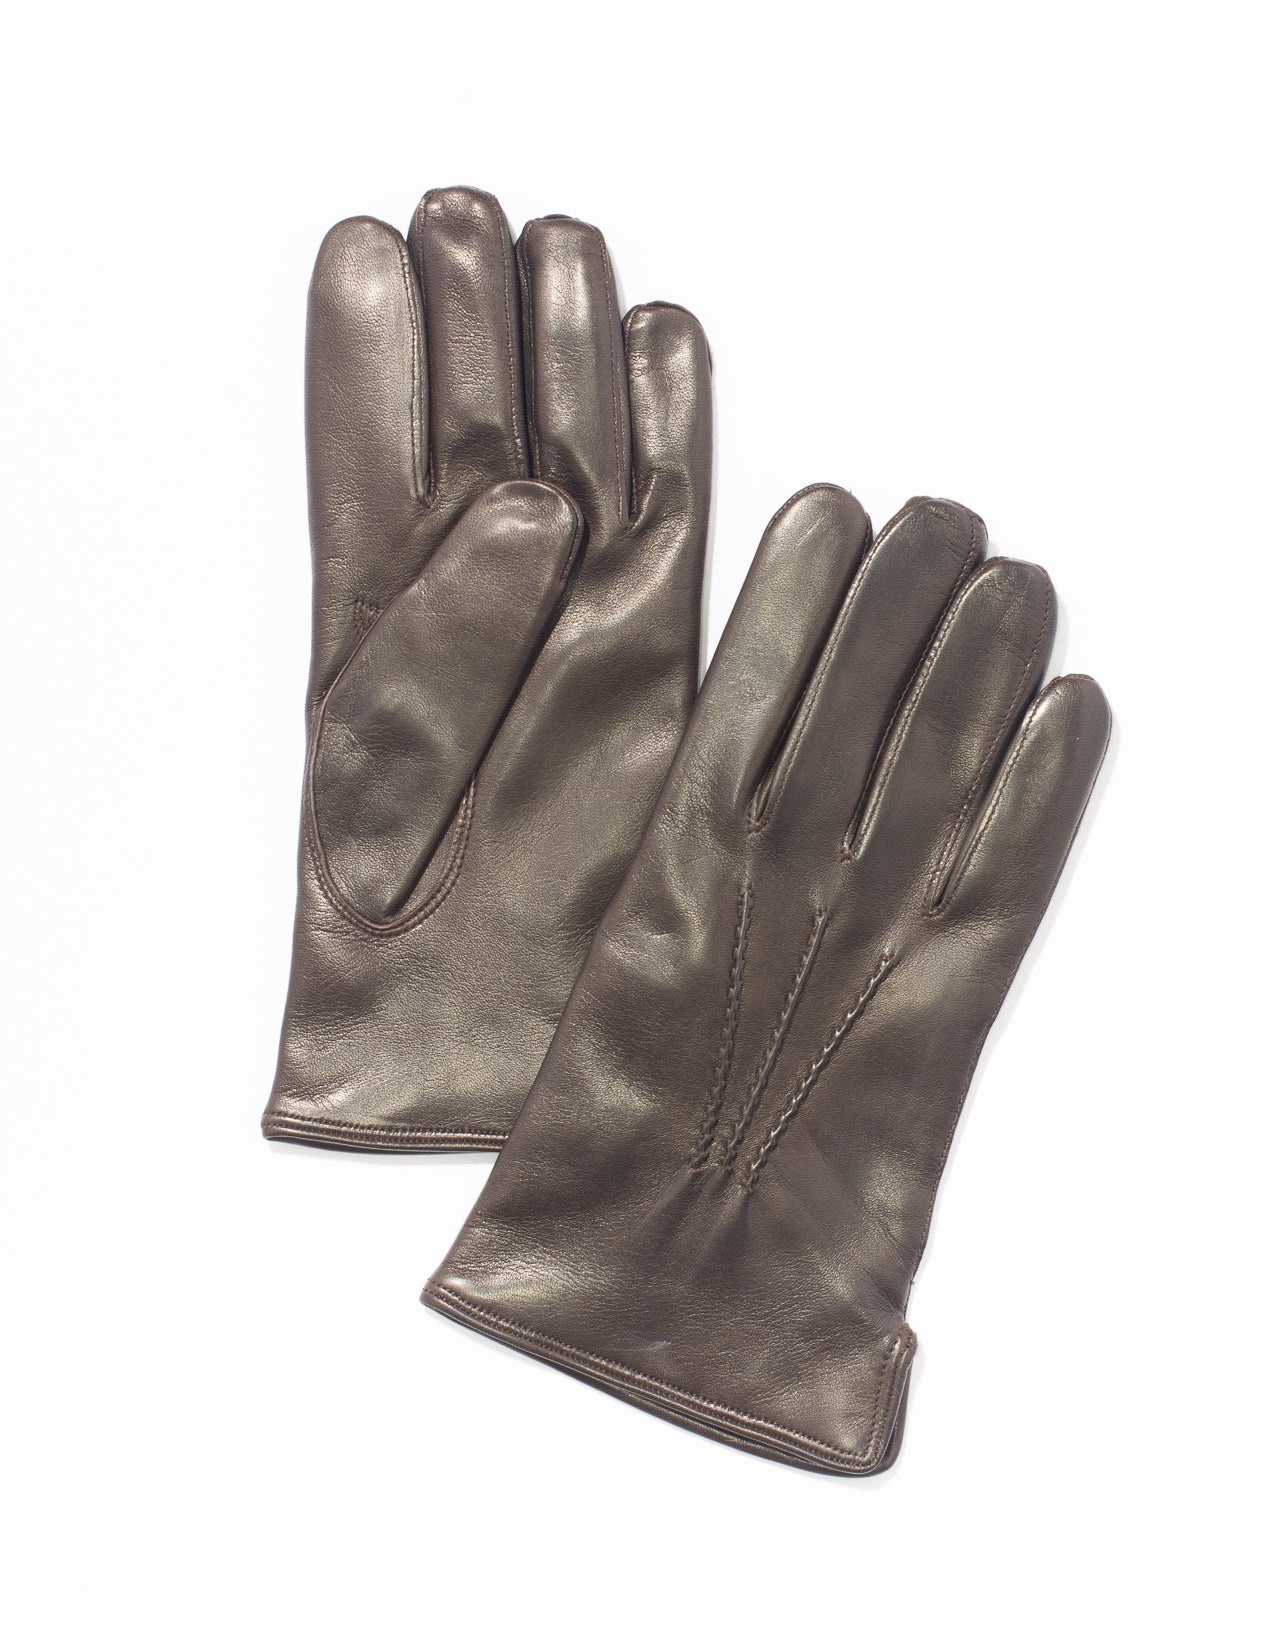 BROWN NAPPA LEATHER GLOVES